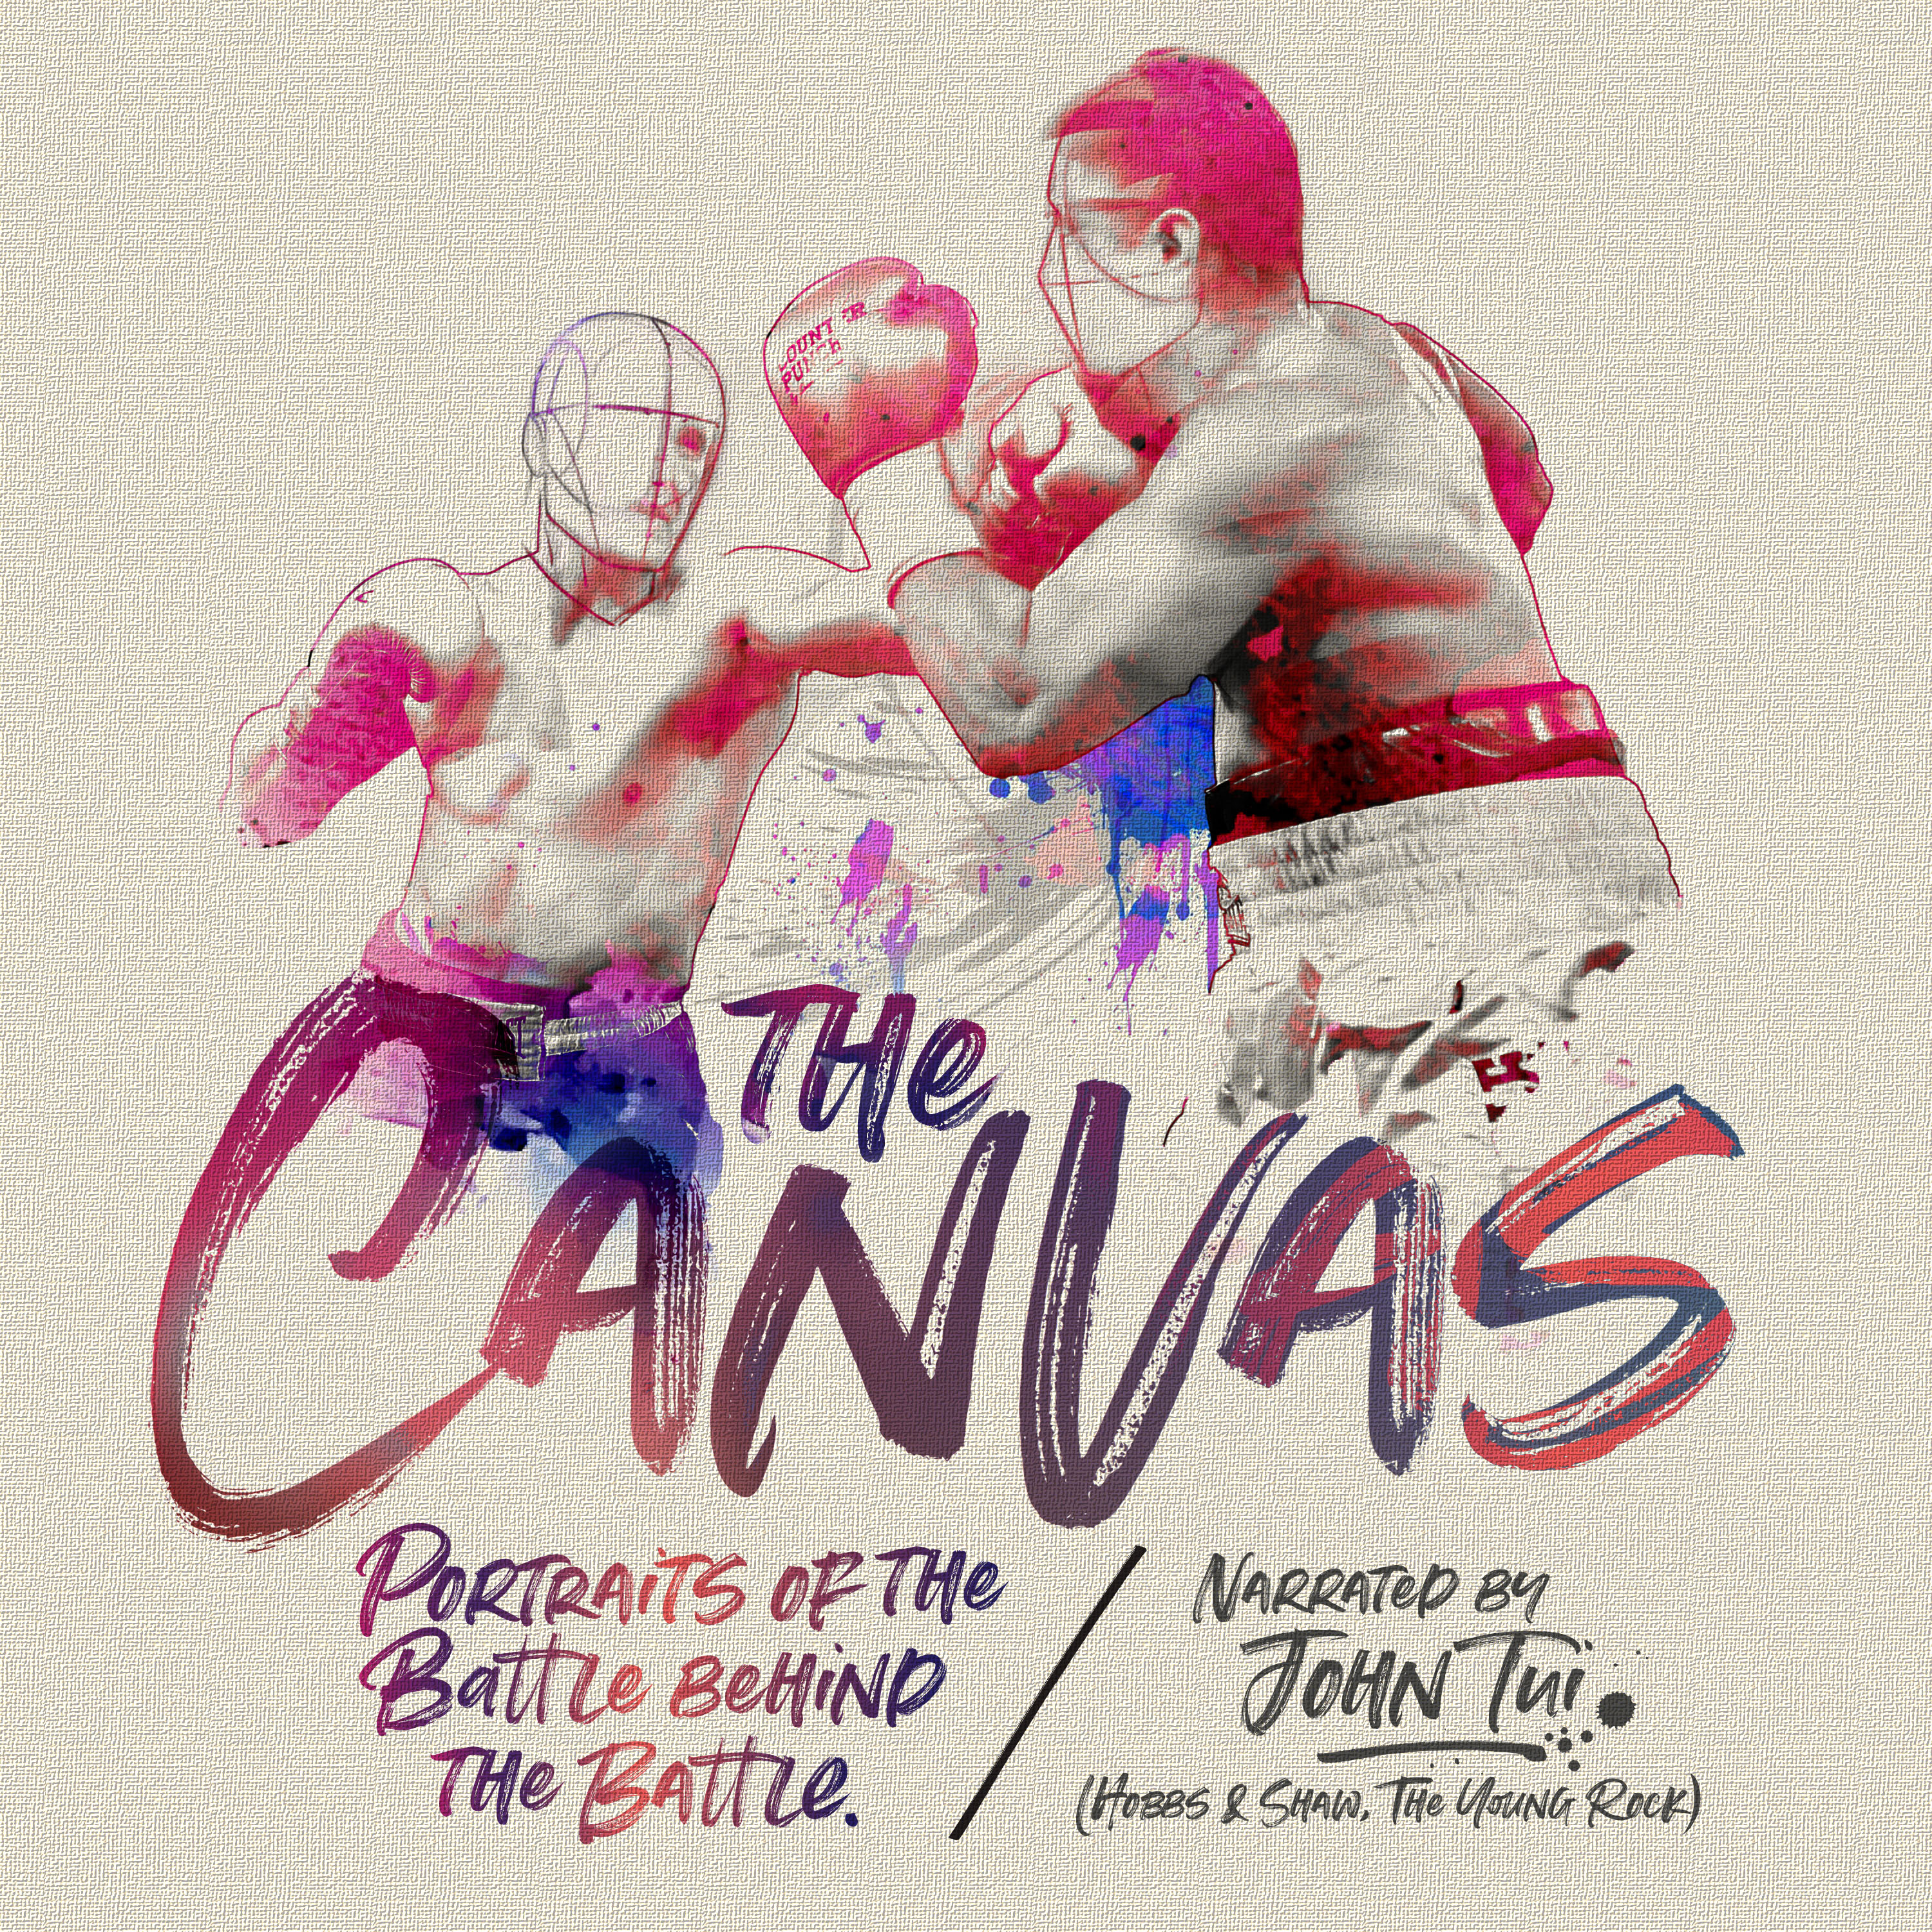 The Canvas